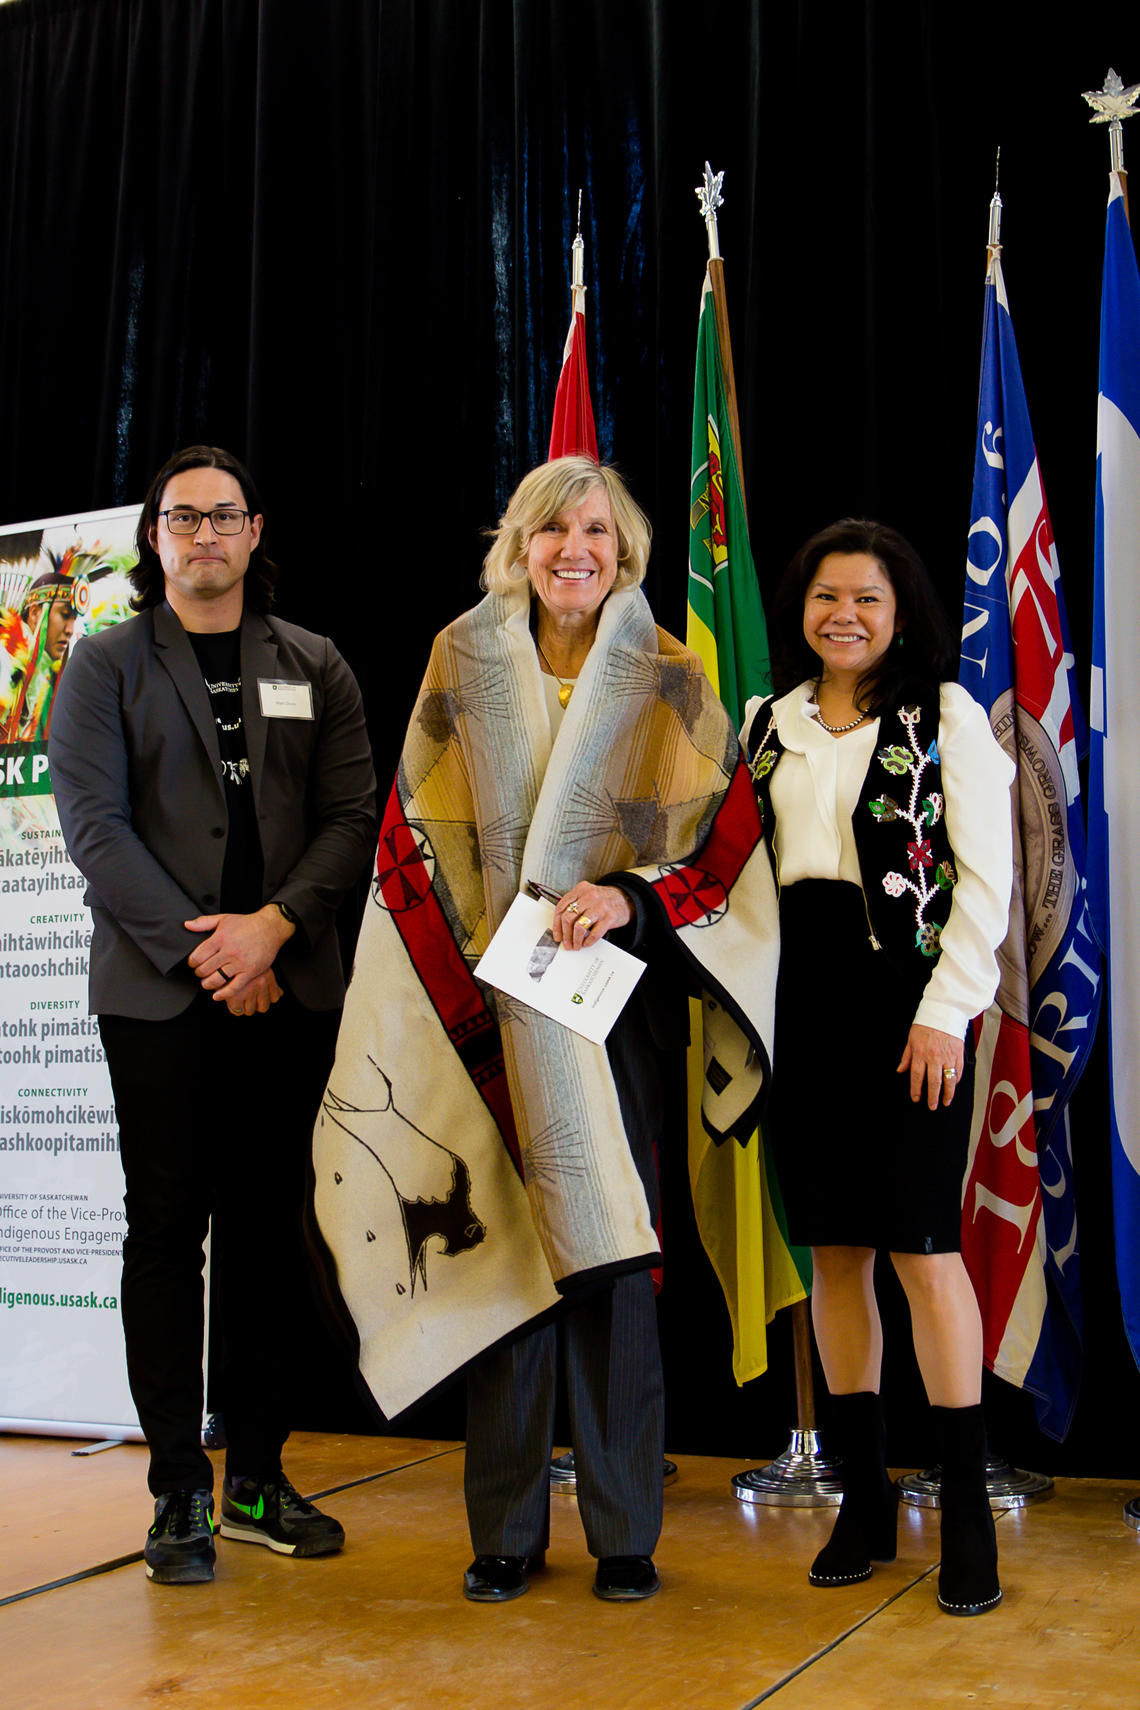 Kathleen Mahoney at the ceremony where she was gifted a blanket from the University of Saskatchewan